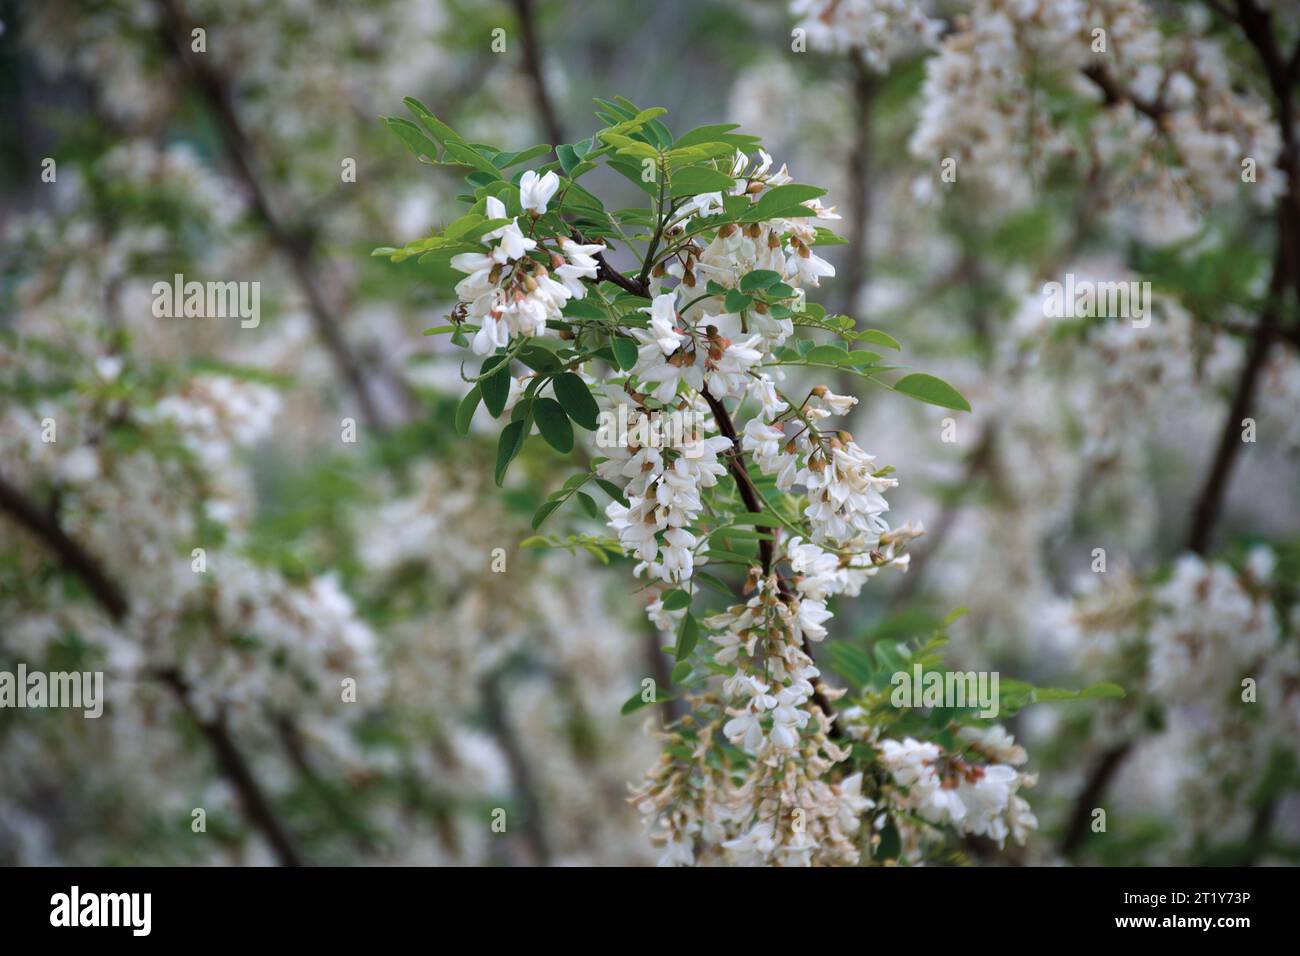 White acacia clusters. Acacia blossoms in the month of May. Stock Photo